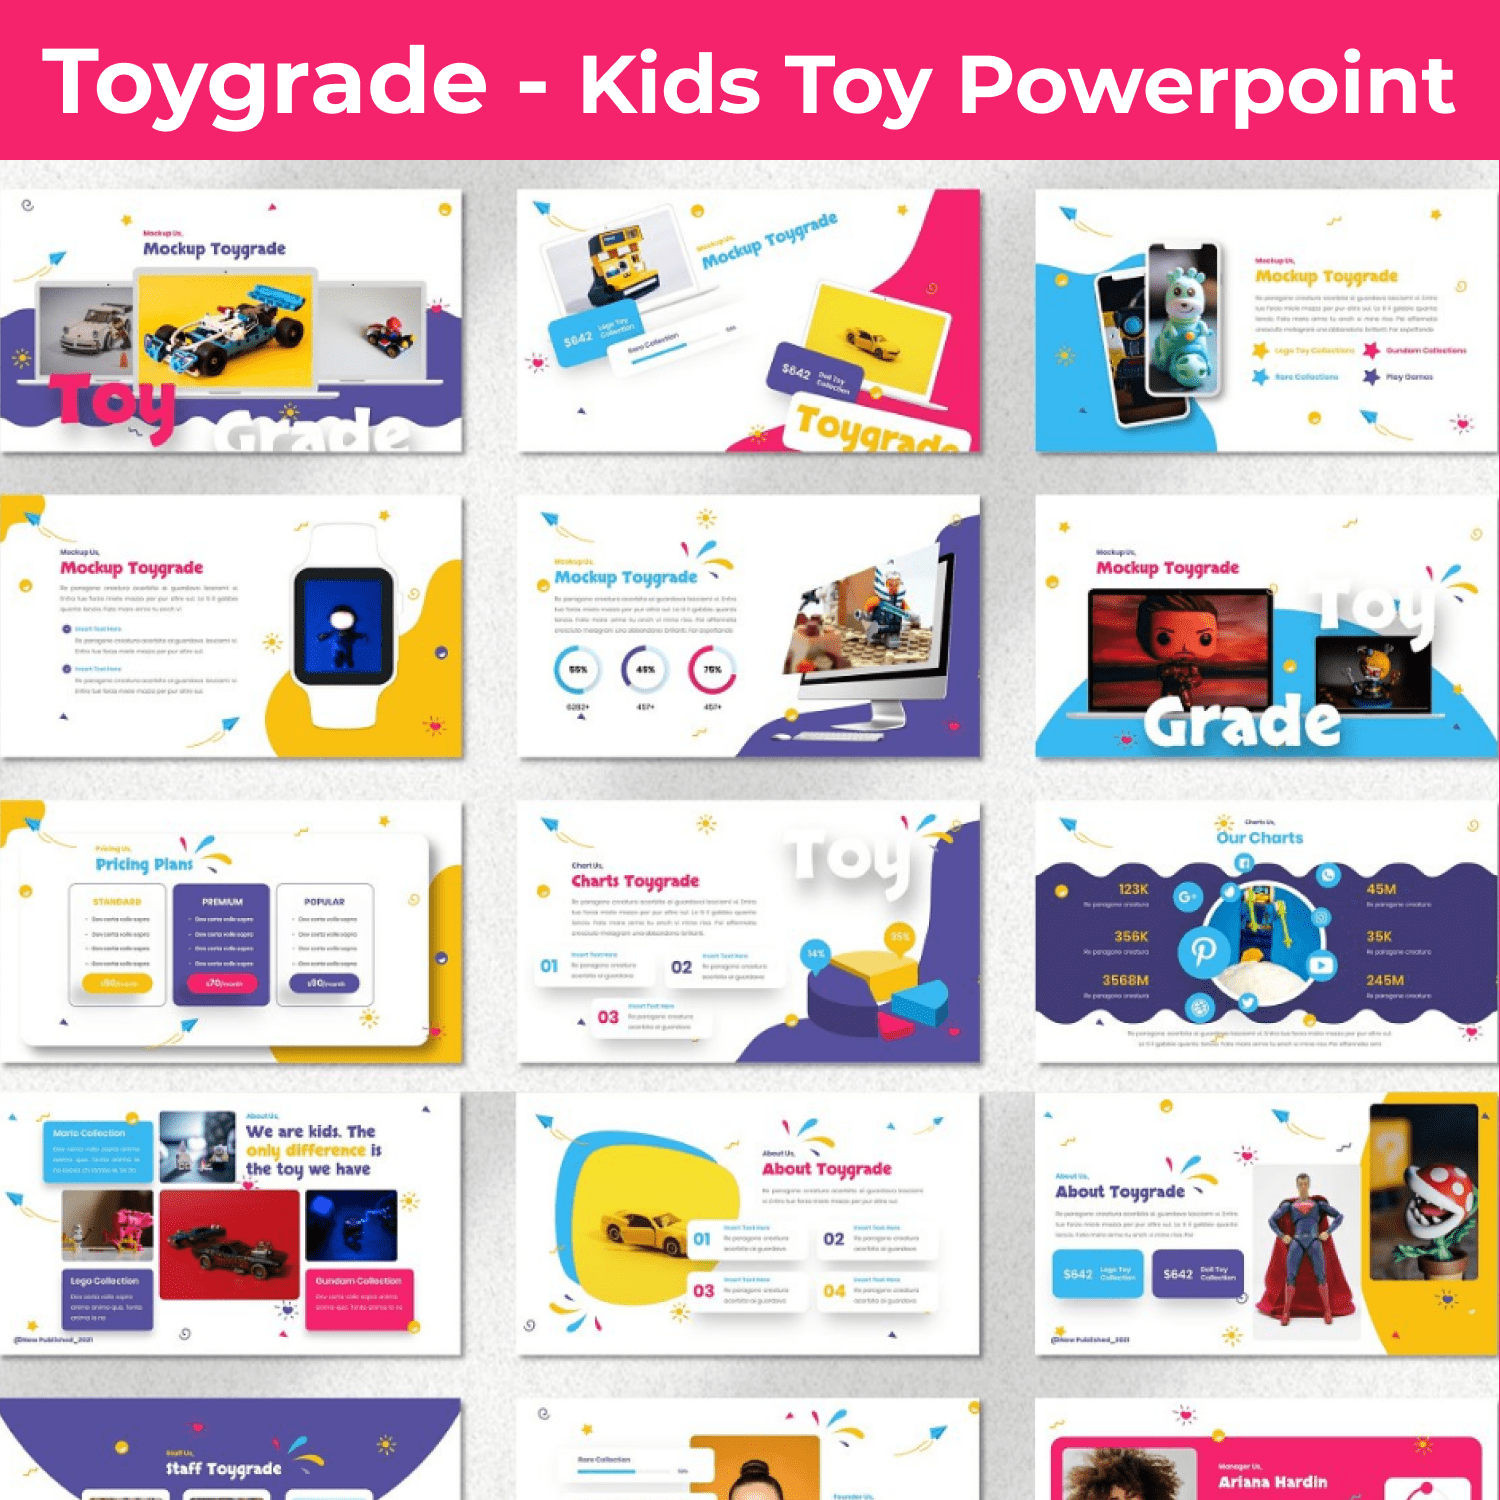 Toygrade - Kids Toy Powerpoint main cover.